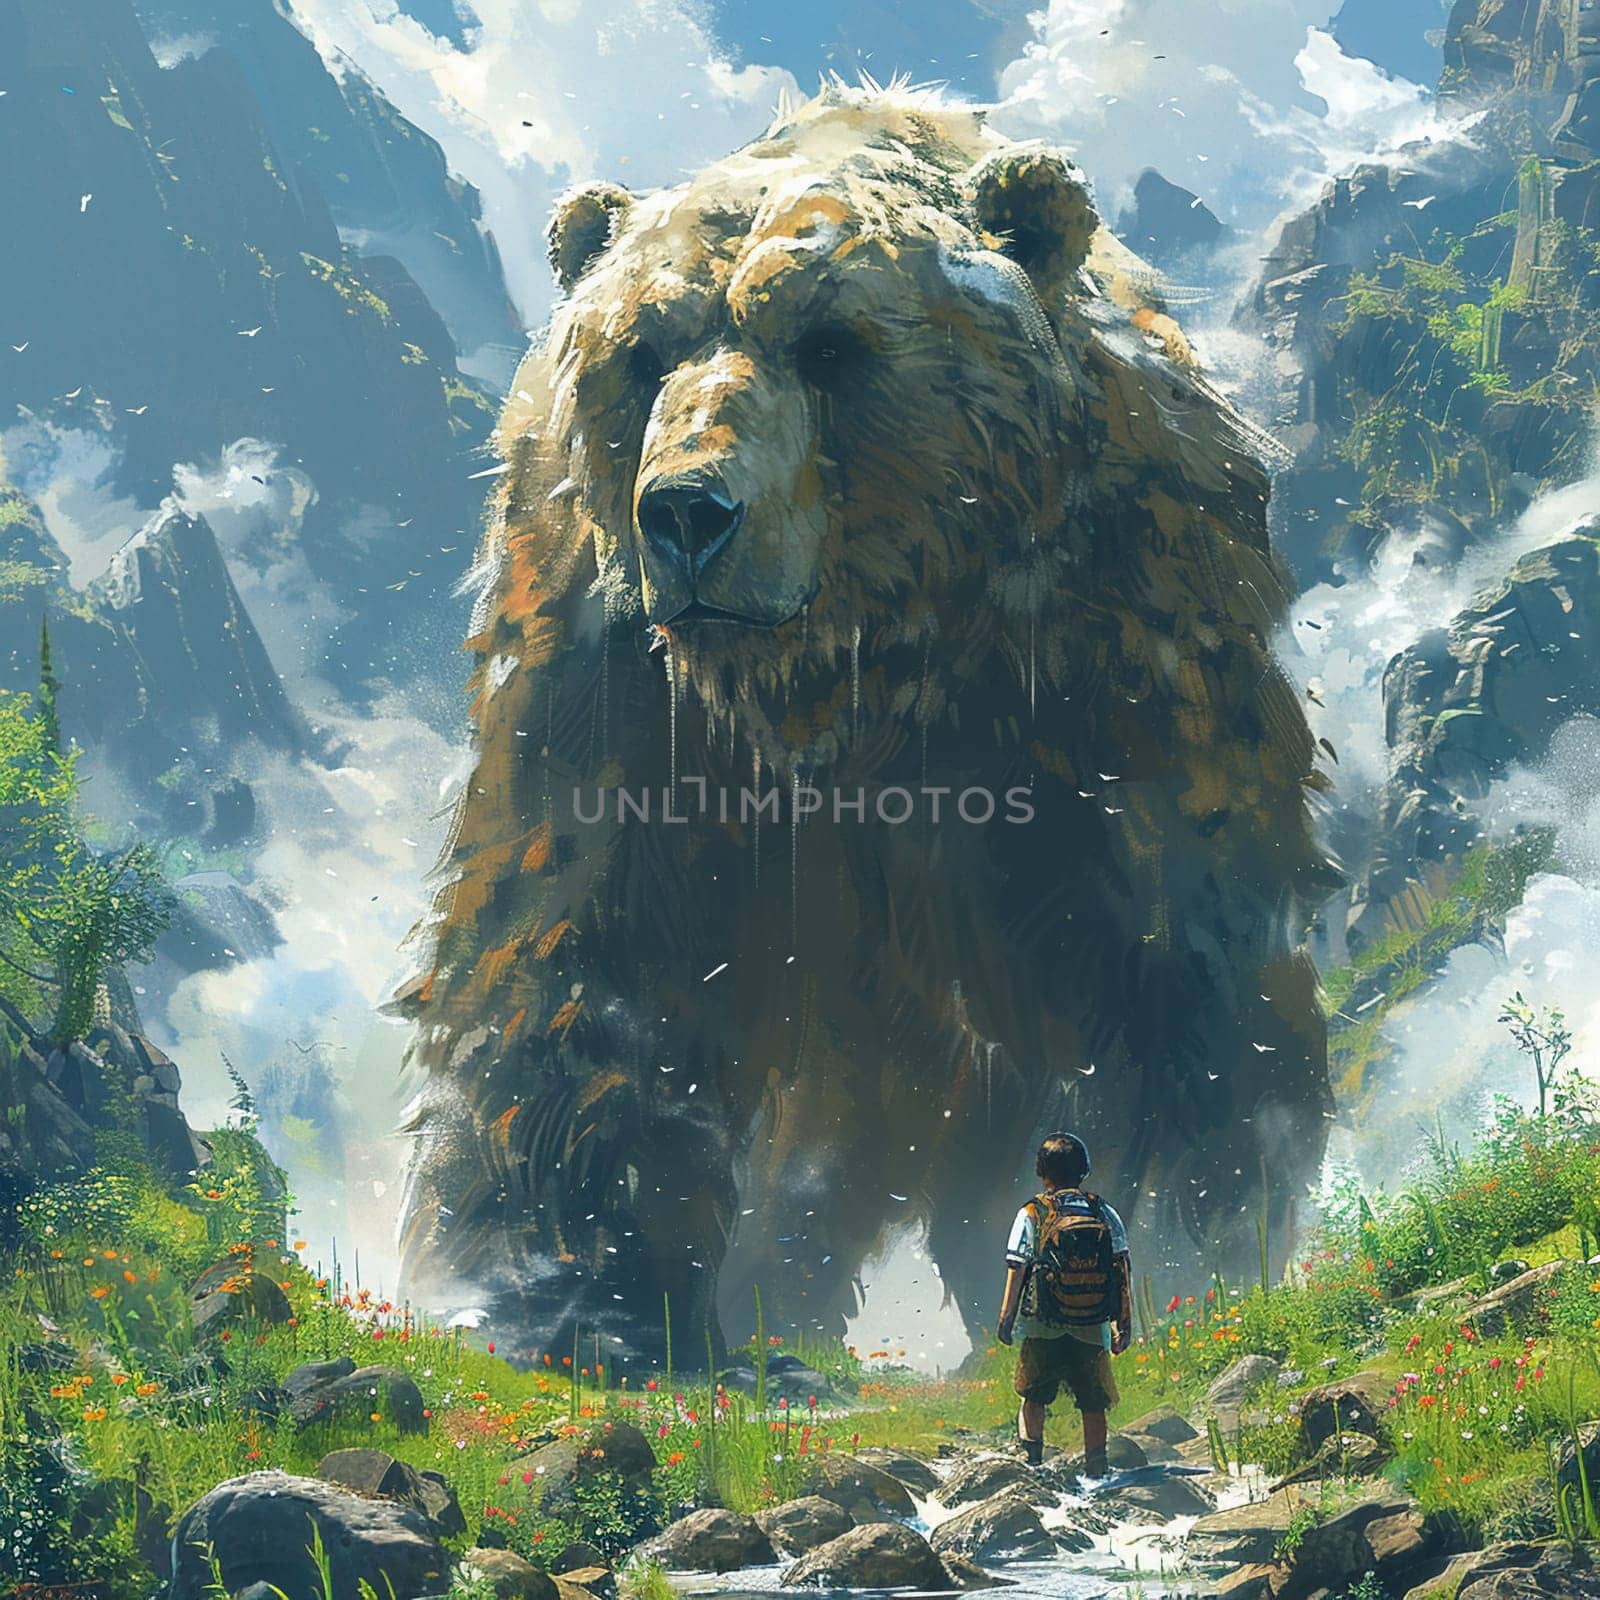 Concept art for video game where players protect endangered species on World Wildlife Day.